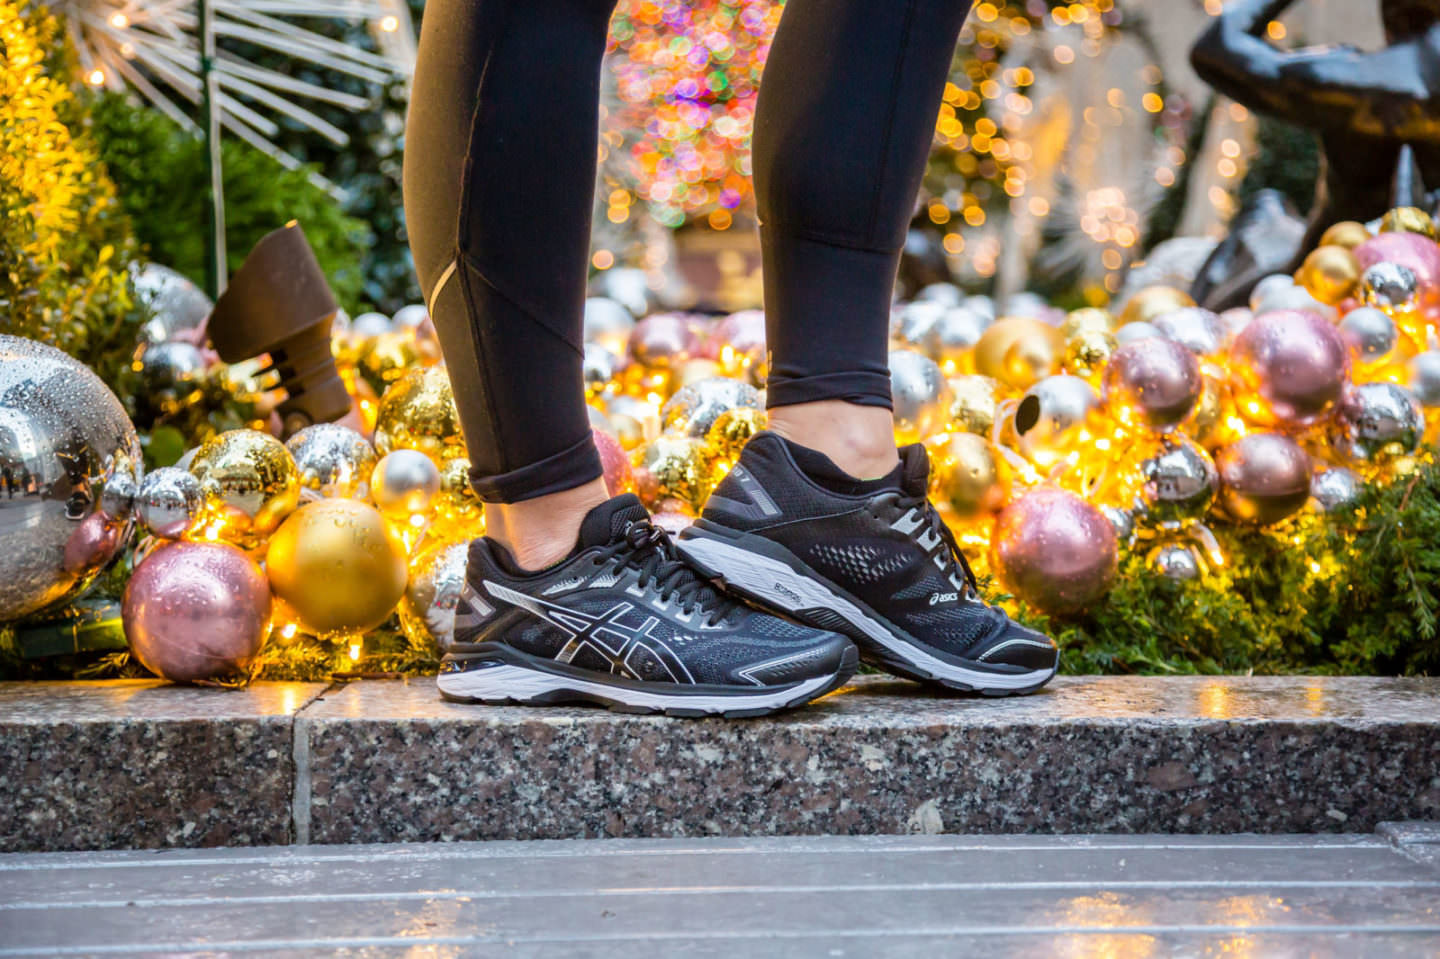 CHristmas in NYC - ASICS GT 2000 7 